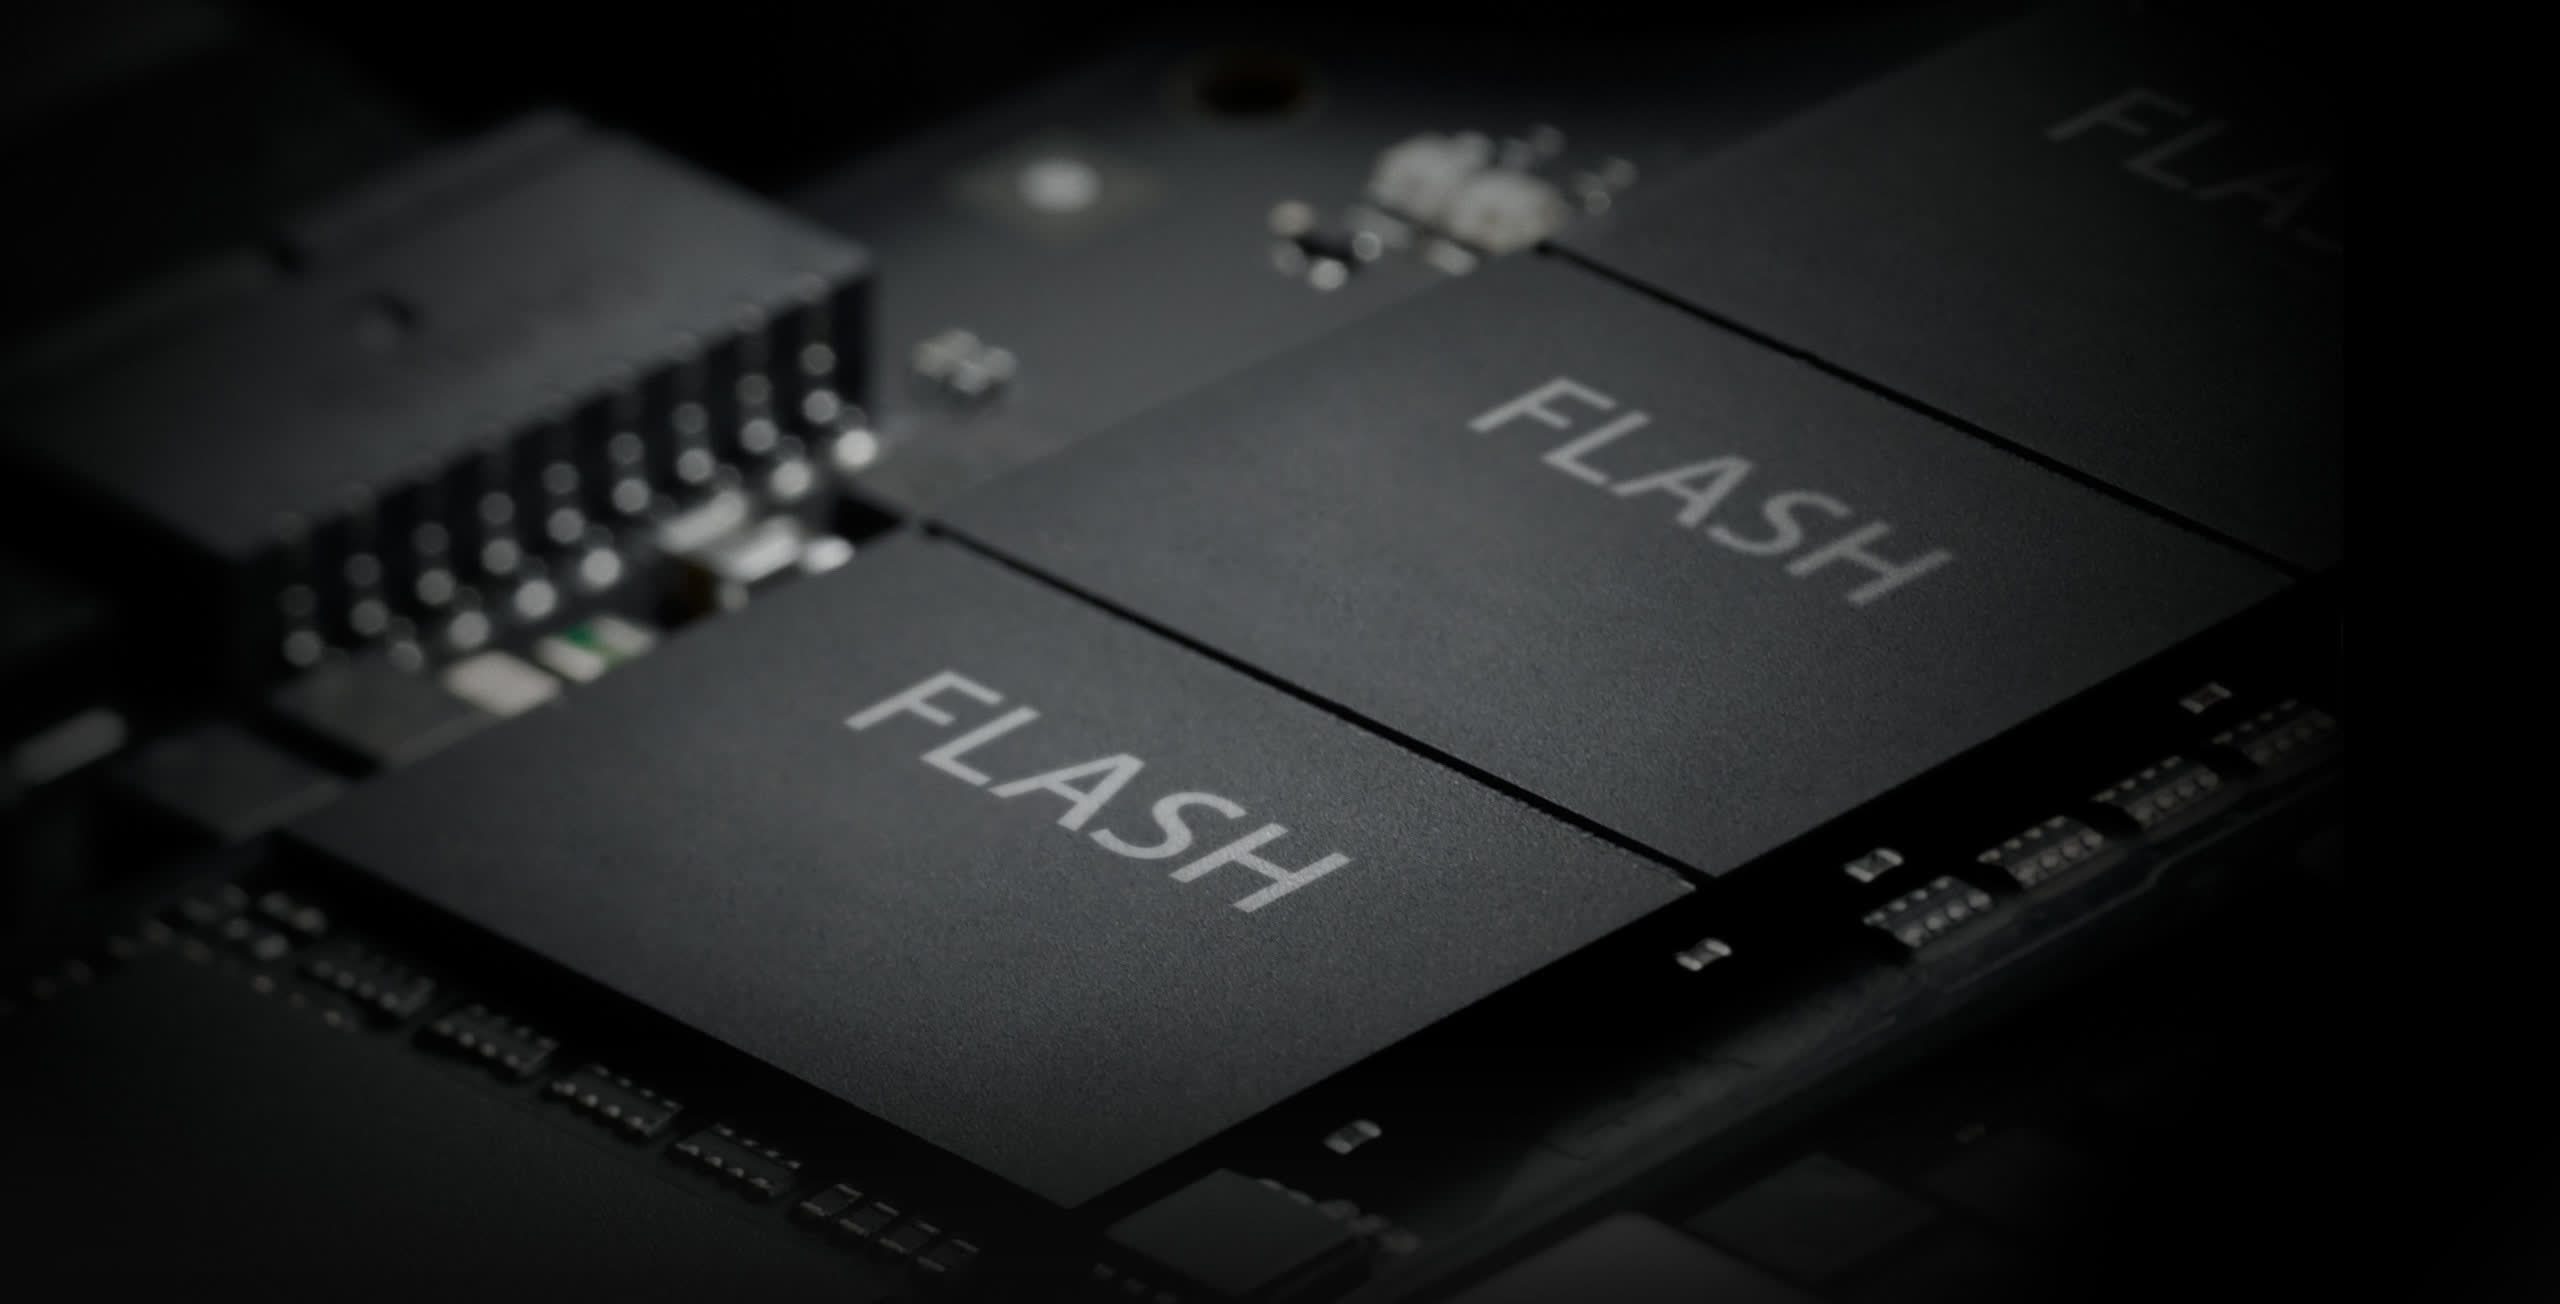 Samsung's new QLC Flash could bring 16TB SSDs to market